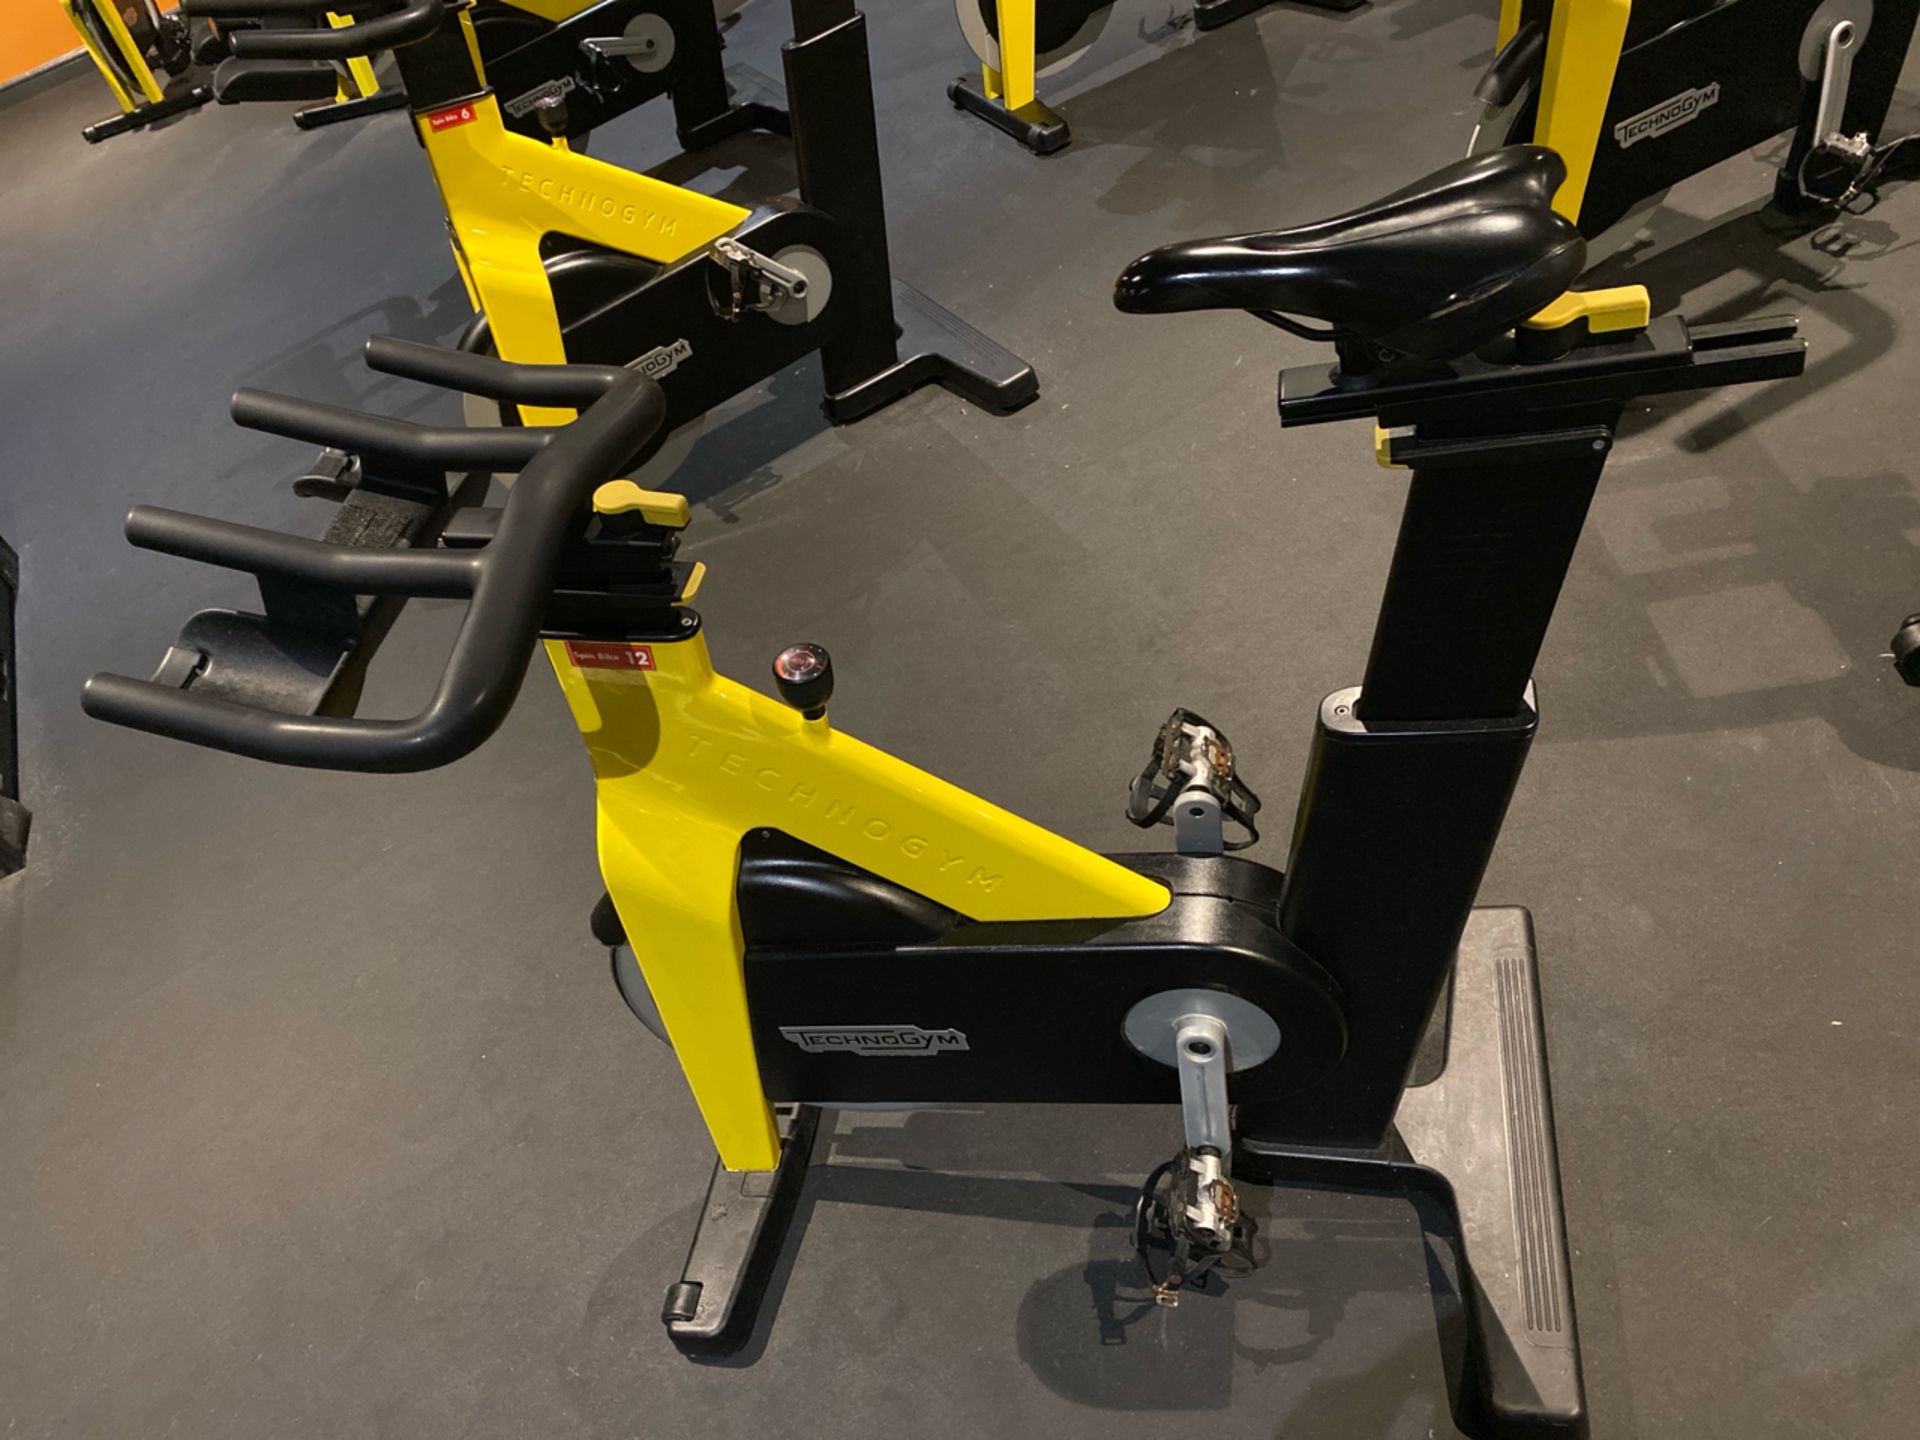 Technogym Group Cycle Ride Spin Bike - Image 4 of 9